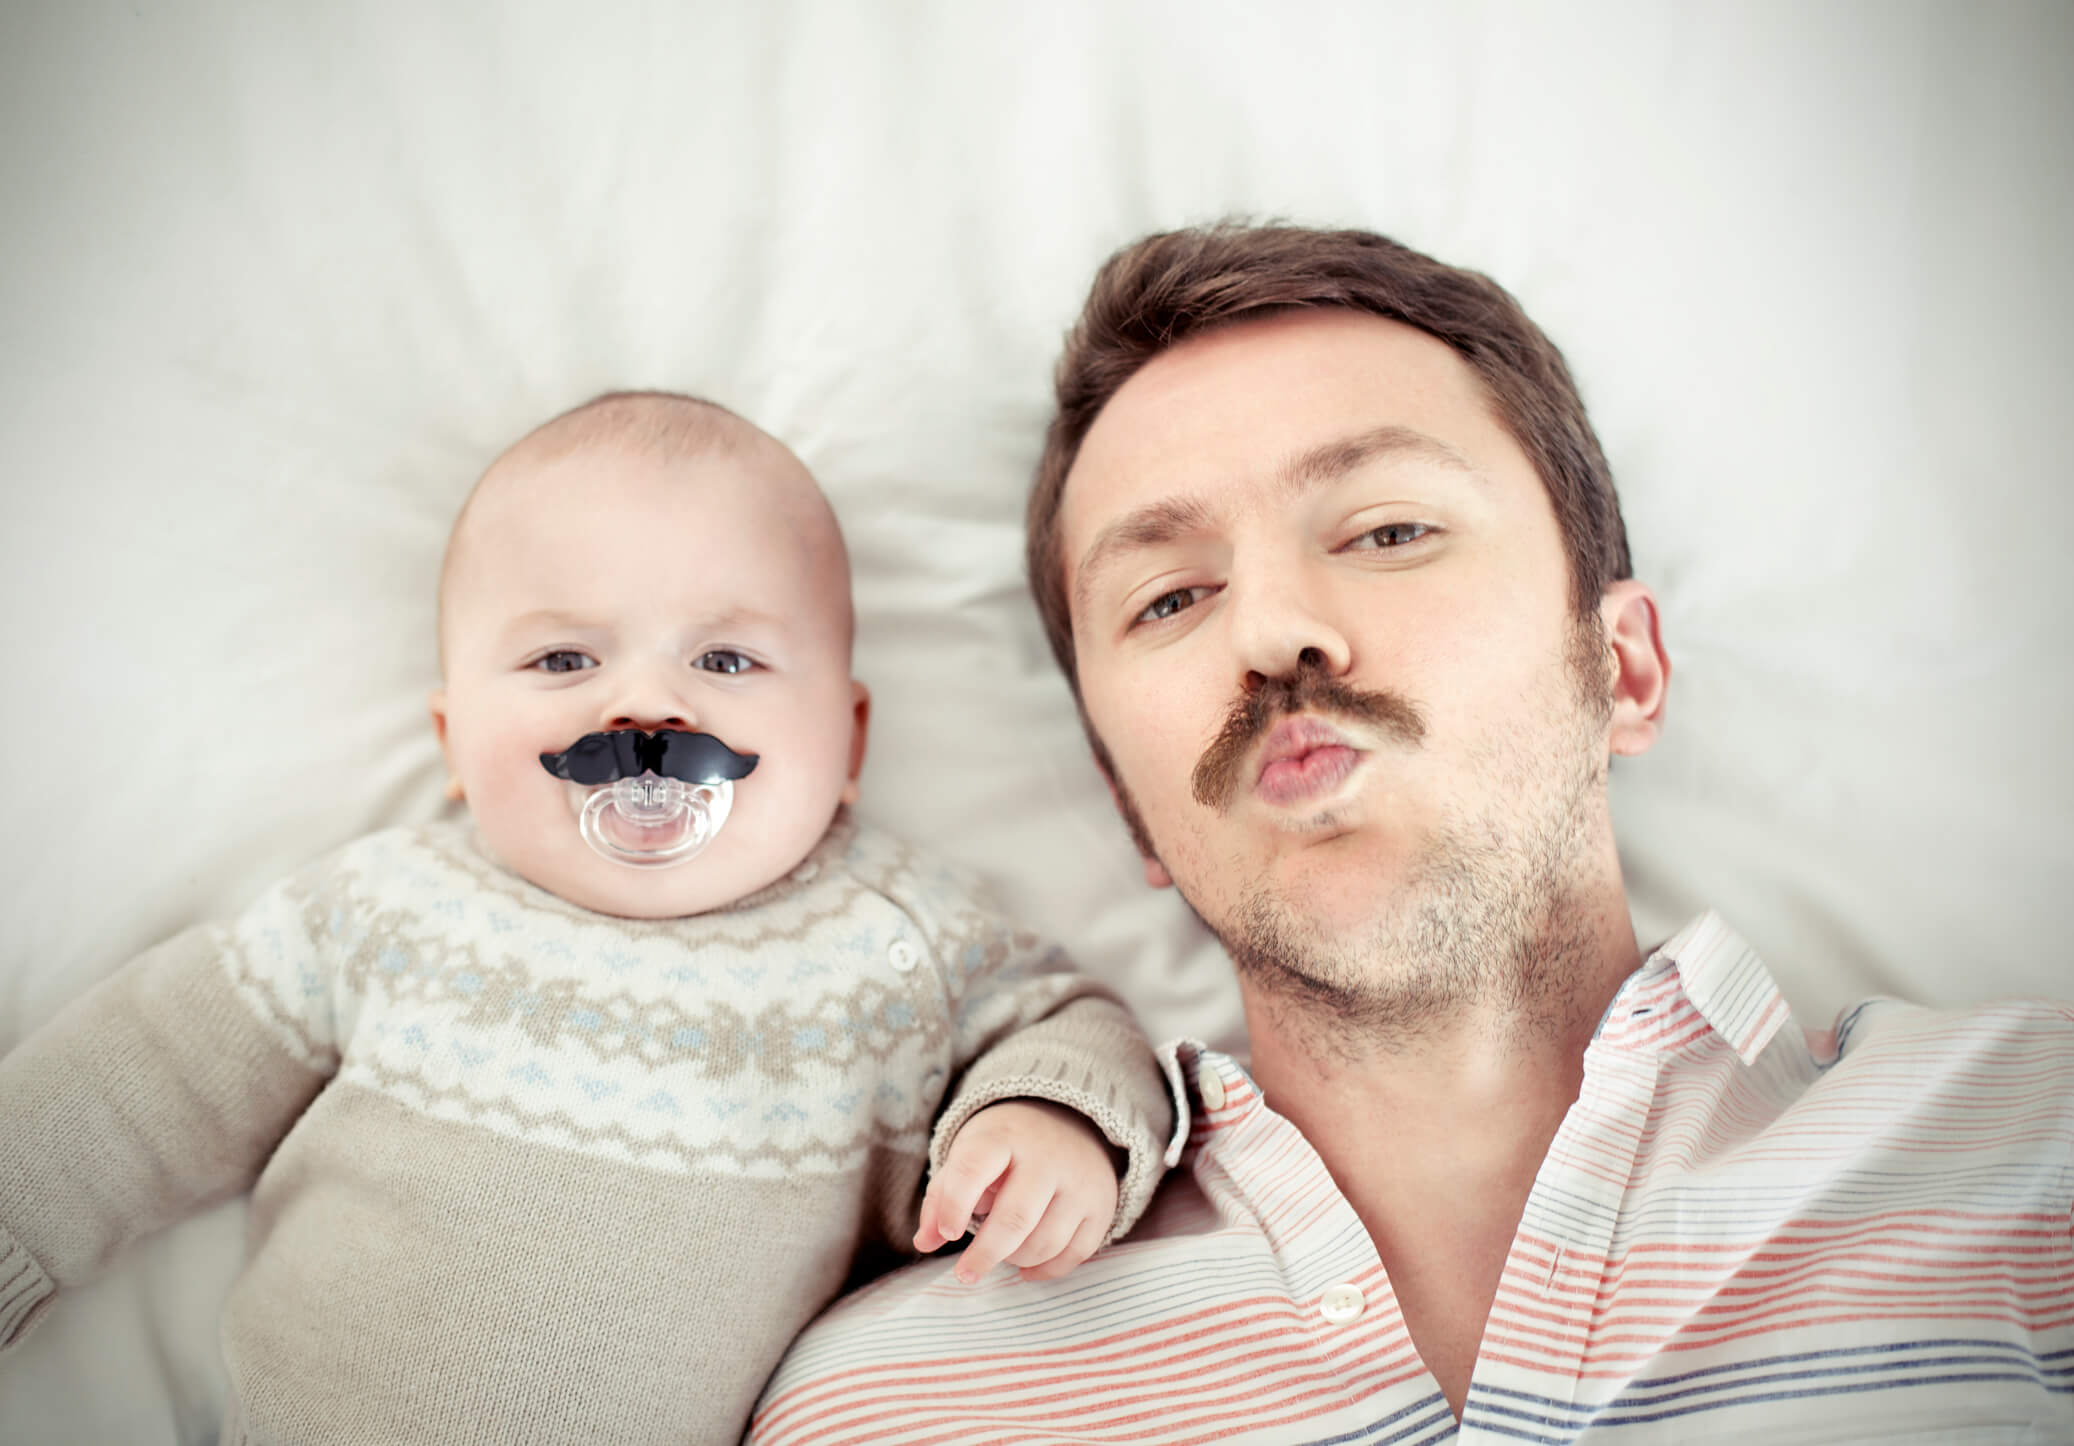 A baby with a mustache pacifier and his dad with a mustache